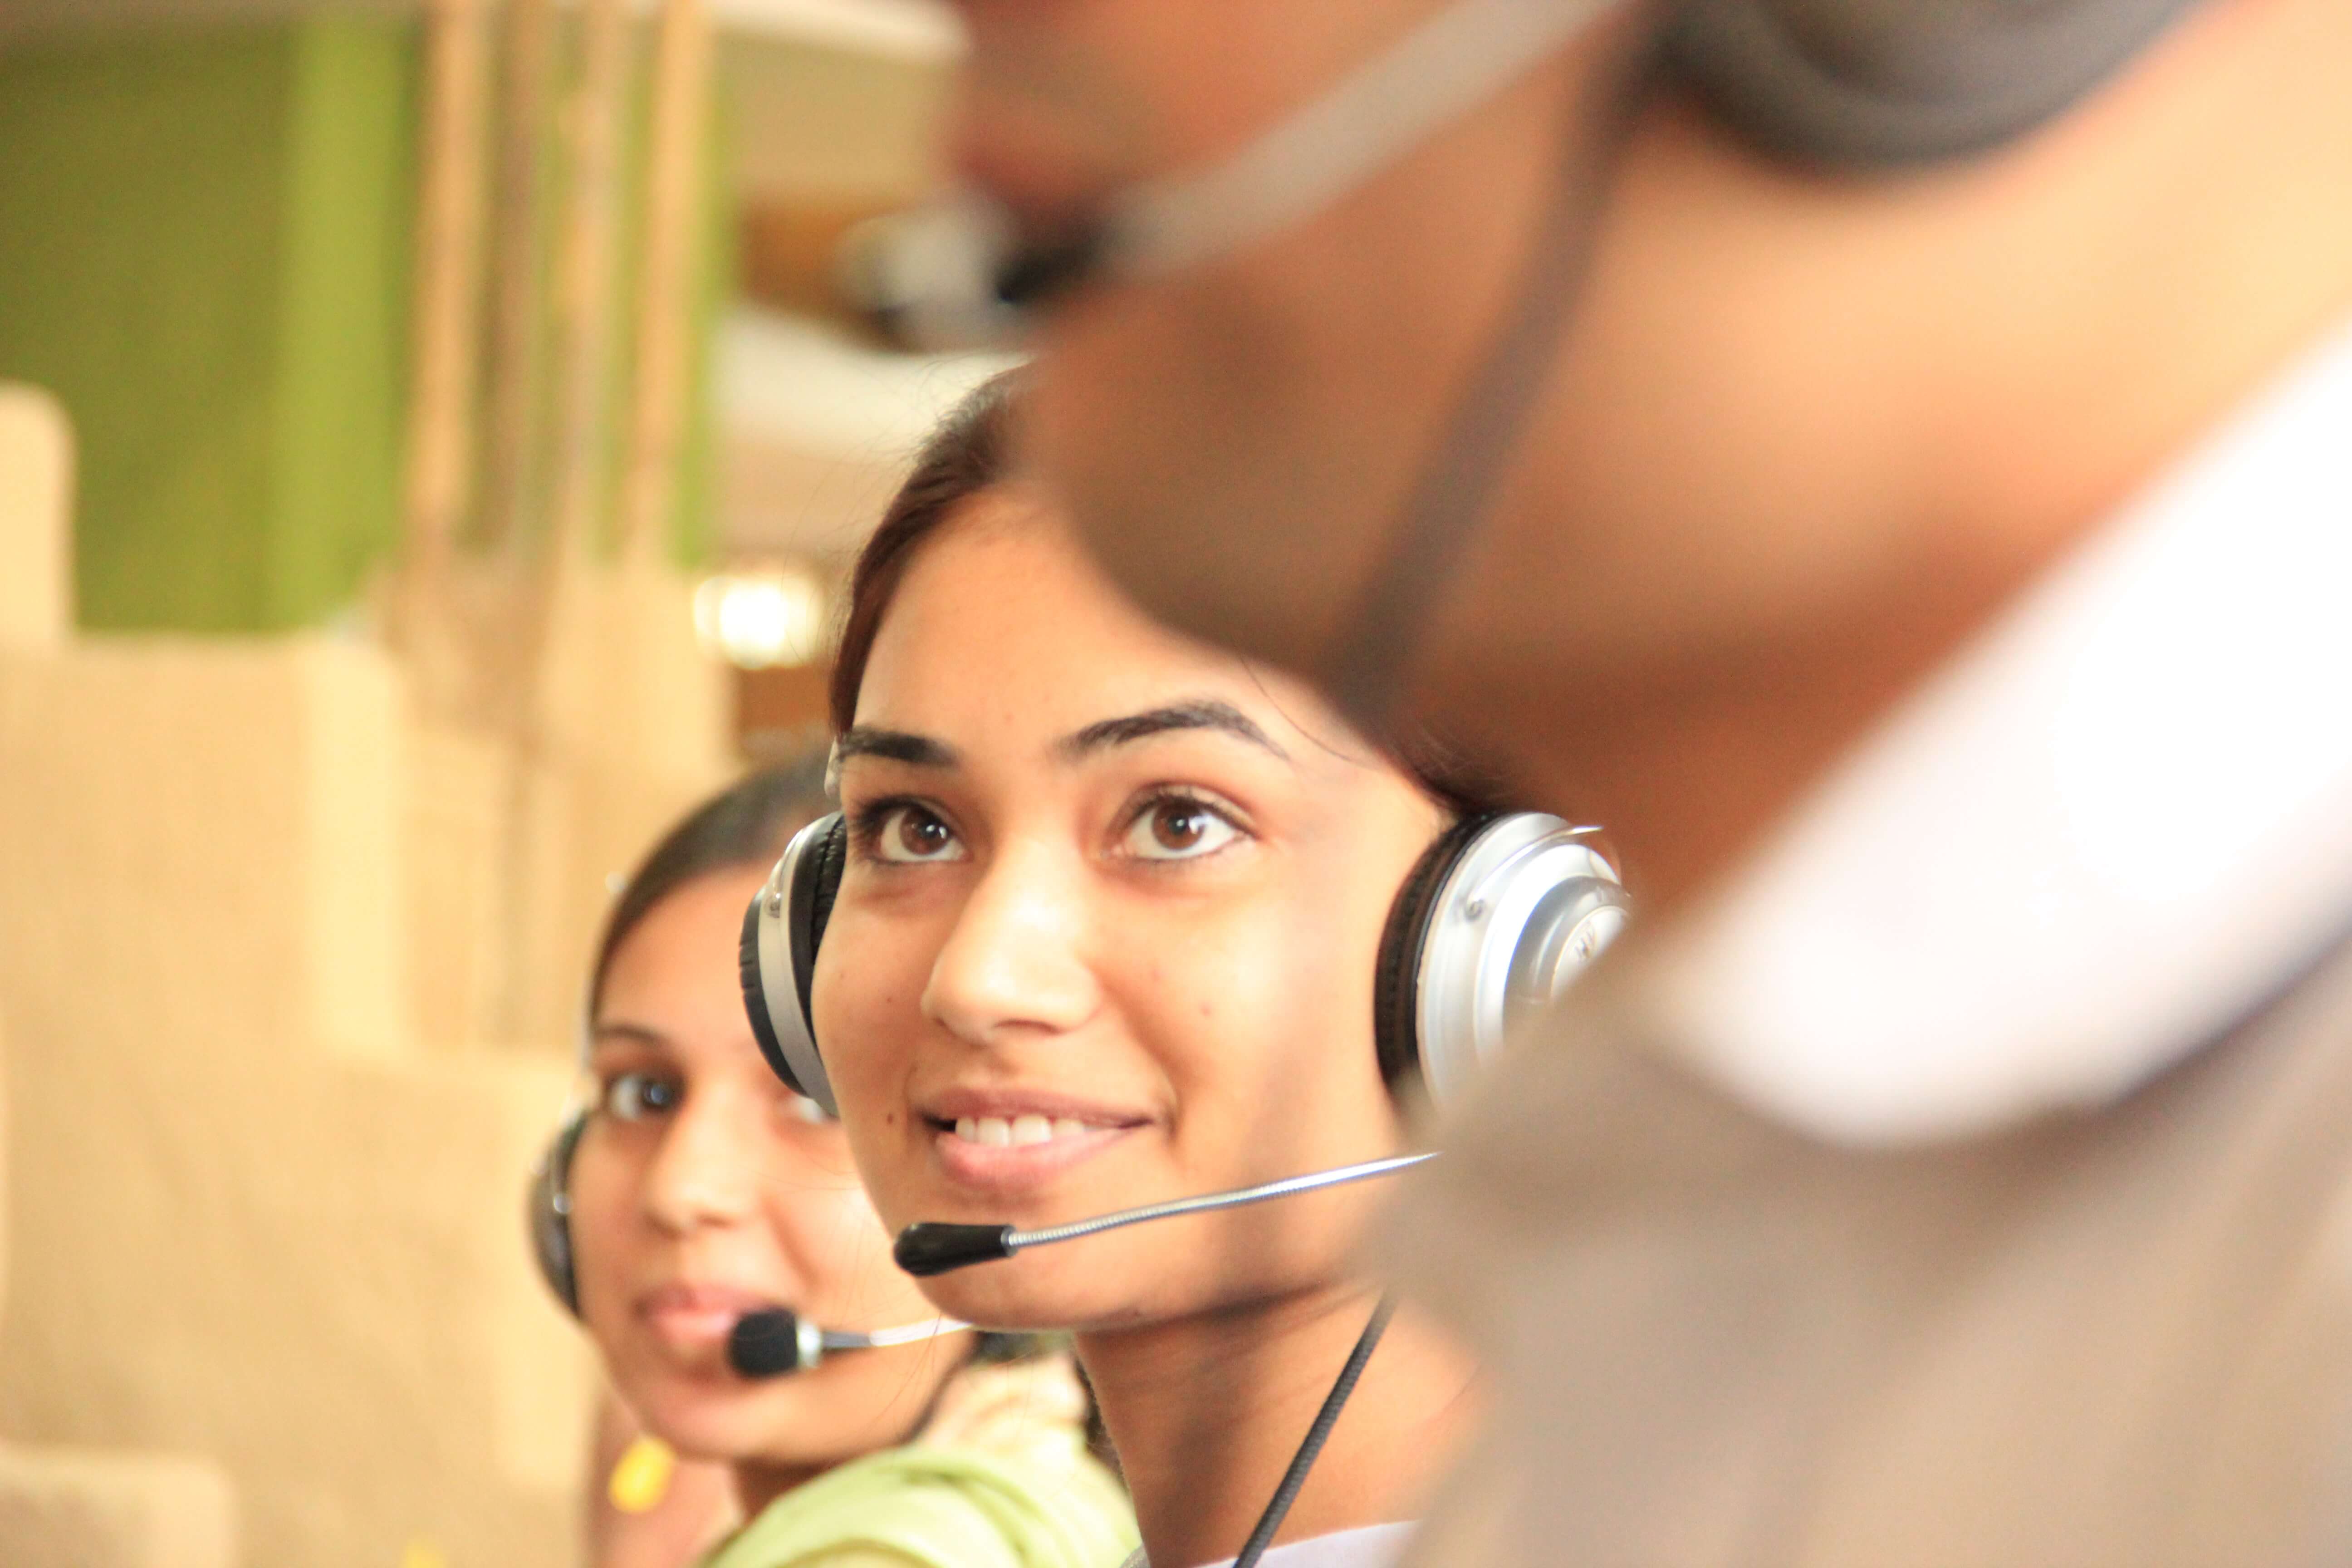 Three people wearing headsets with microphones working at a call center